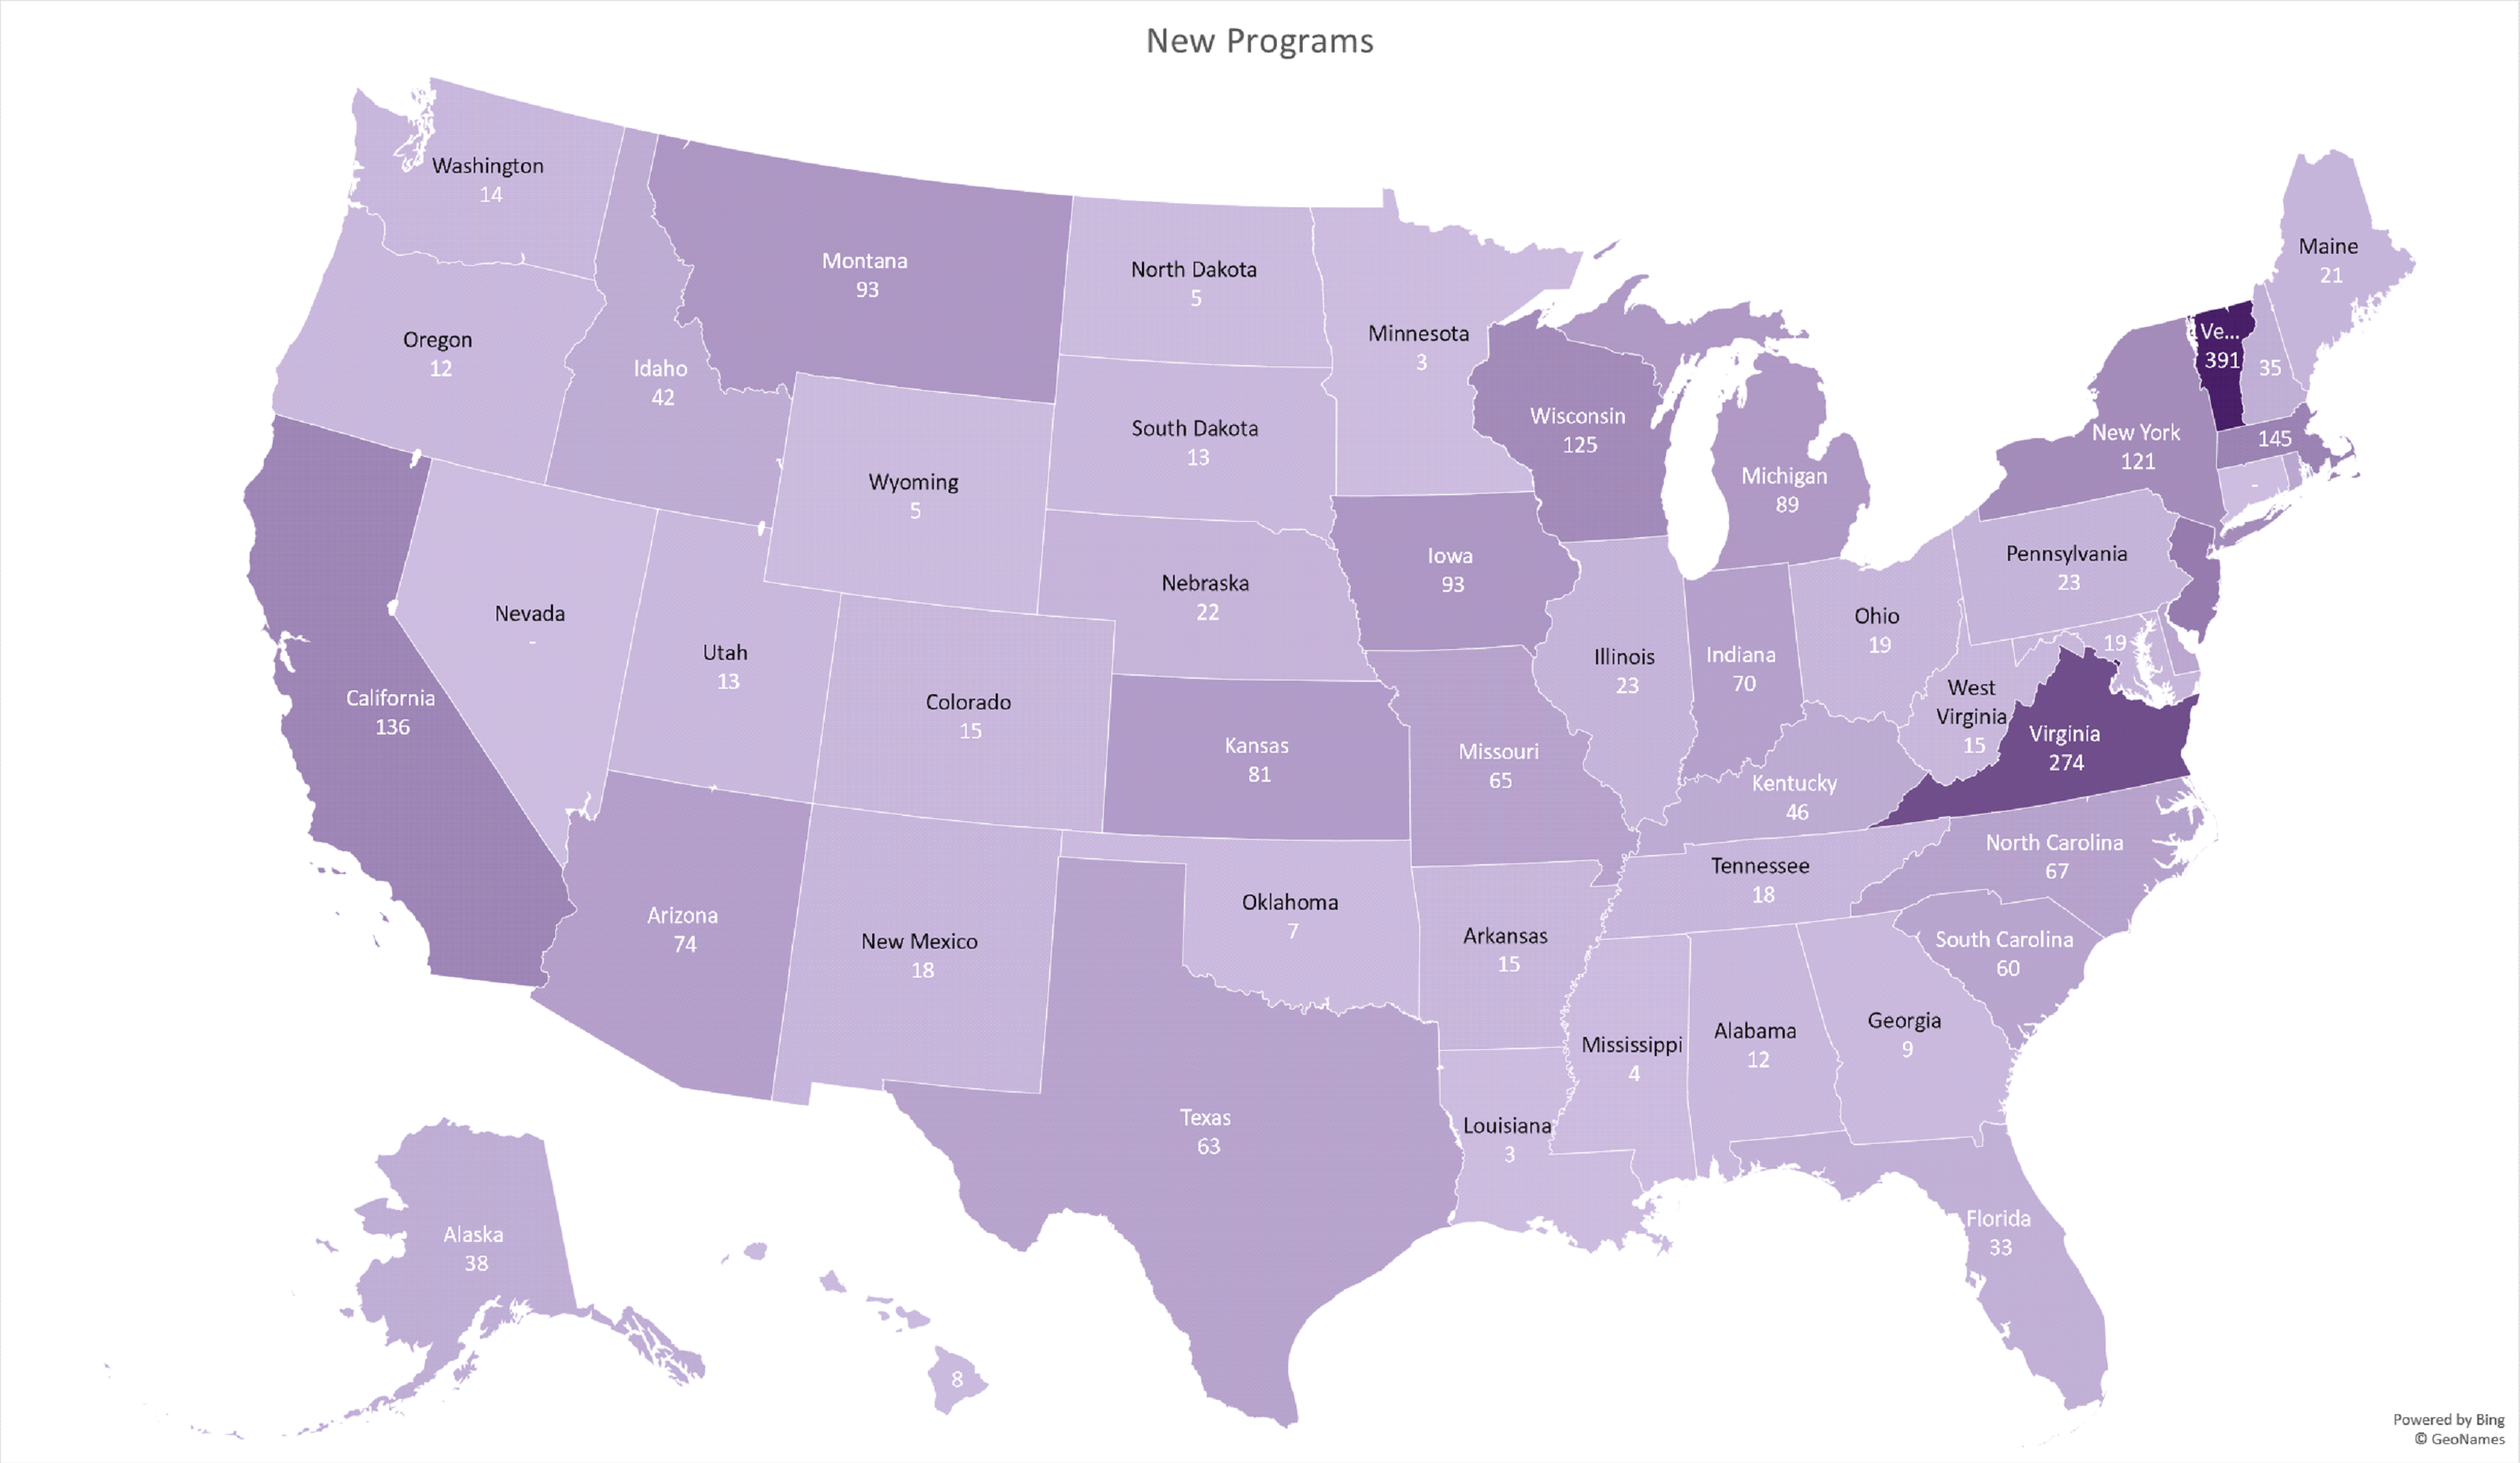 Image of New Programs 2019 State Map